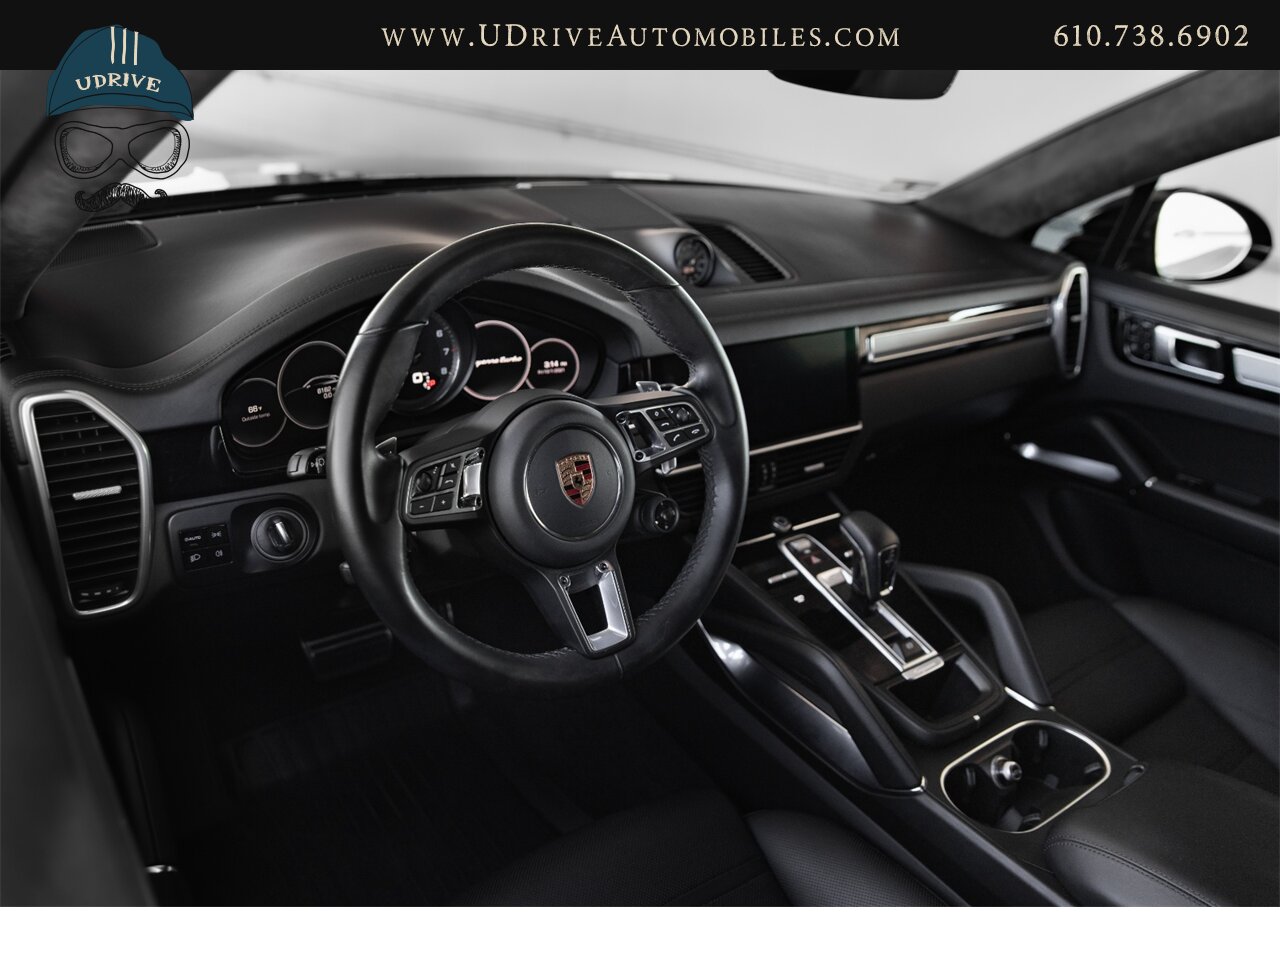 2020 Porsche Cayenne Turbo Coupe 2+1 Rear Comf Seats Prem Plus  22in Turbo Design Whls Sport Exhst Adap Cruise Surround View - Photo 7 - West Chester, PA 19382